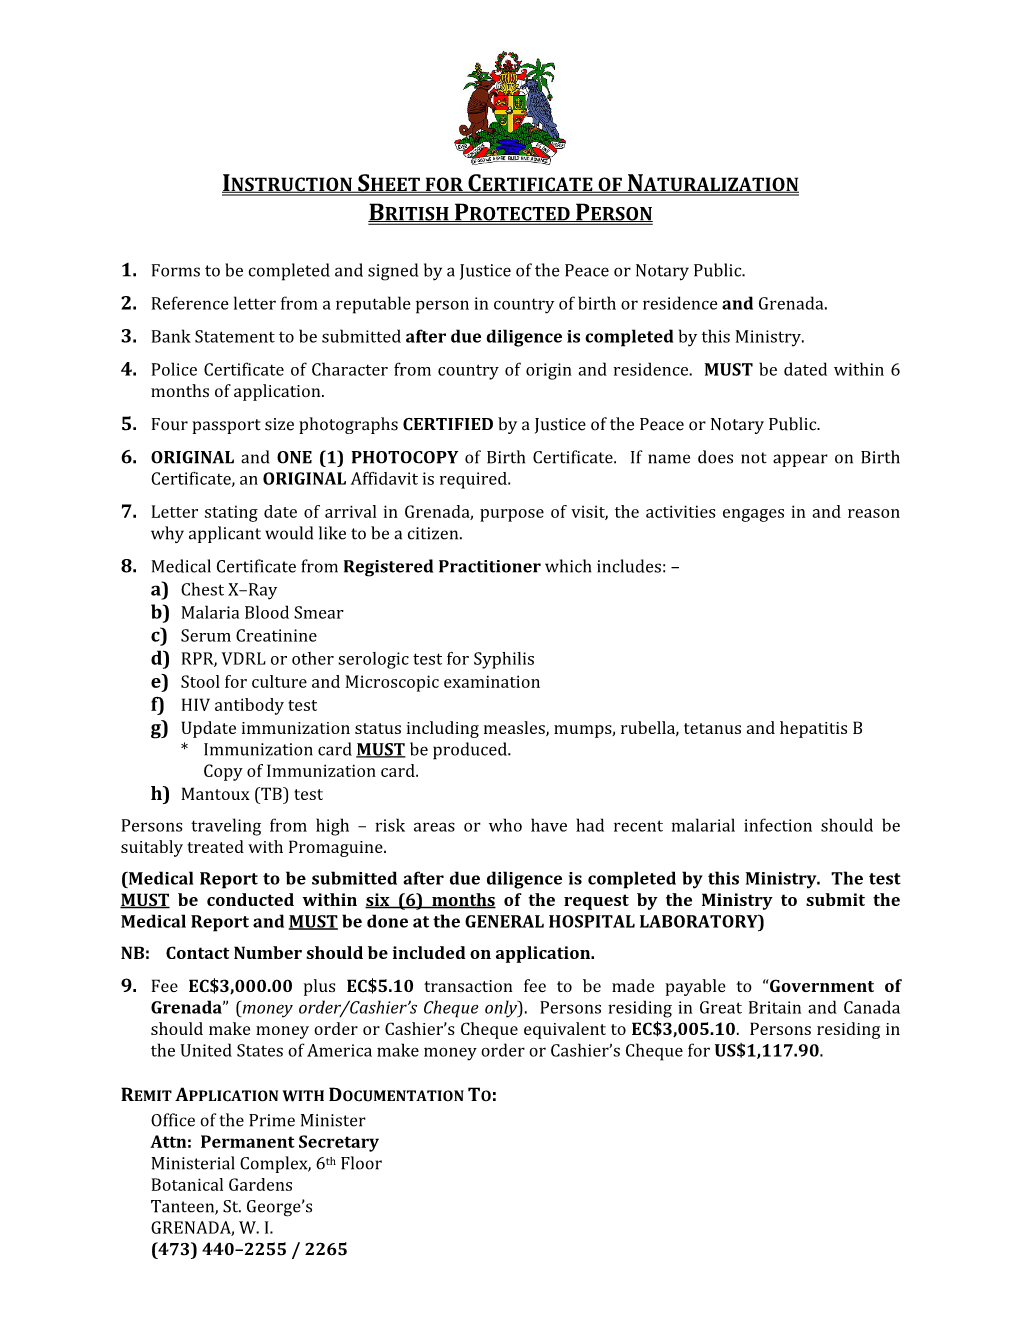 Instruction Sheet for Certificate of Naturalization British Protected Person